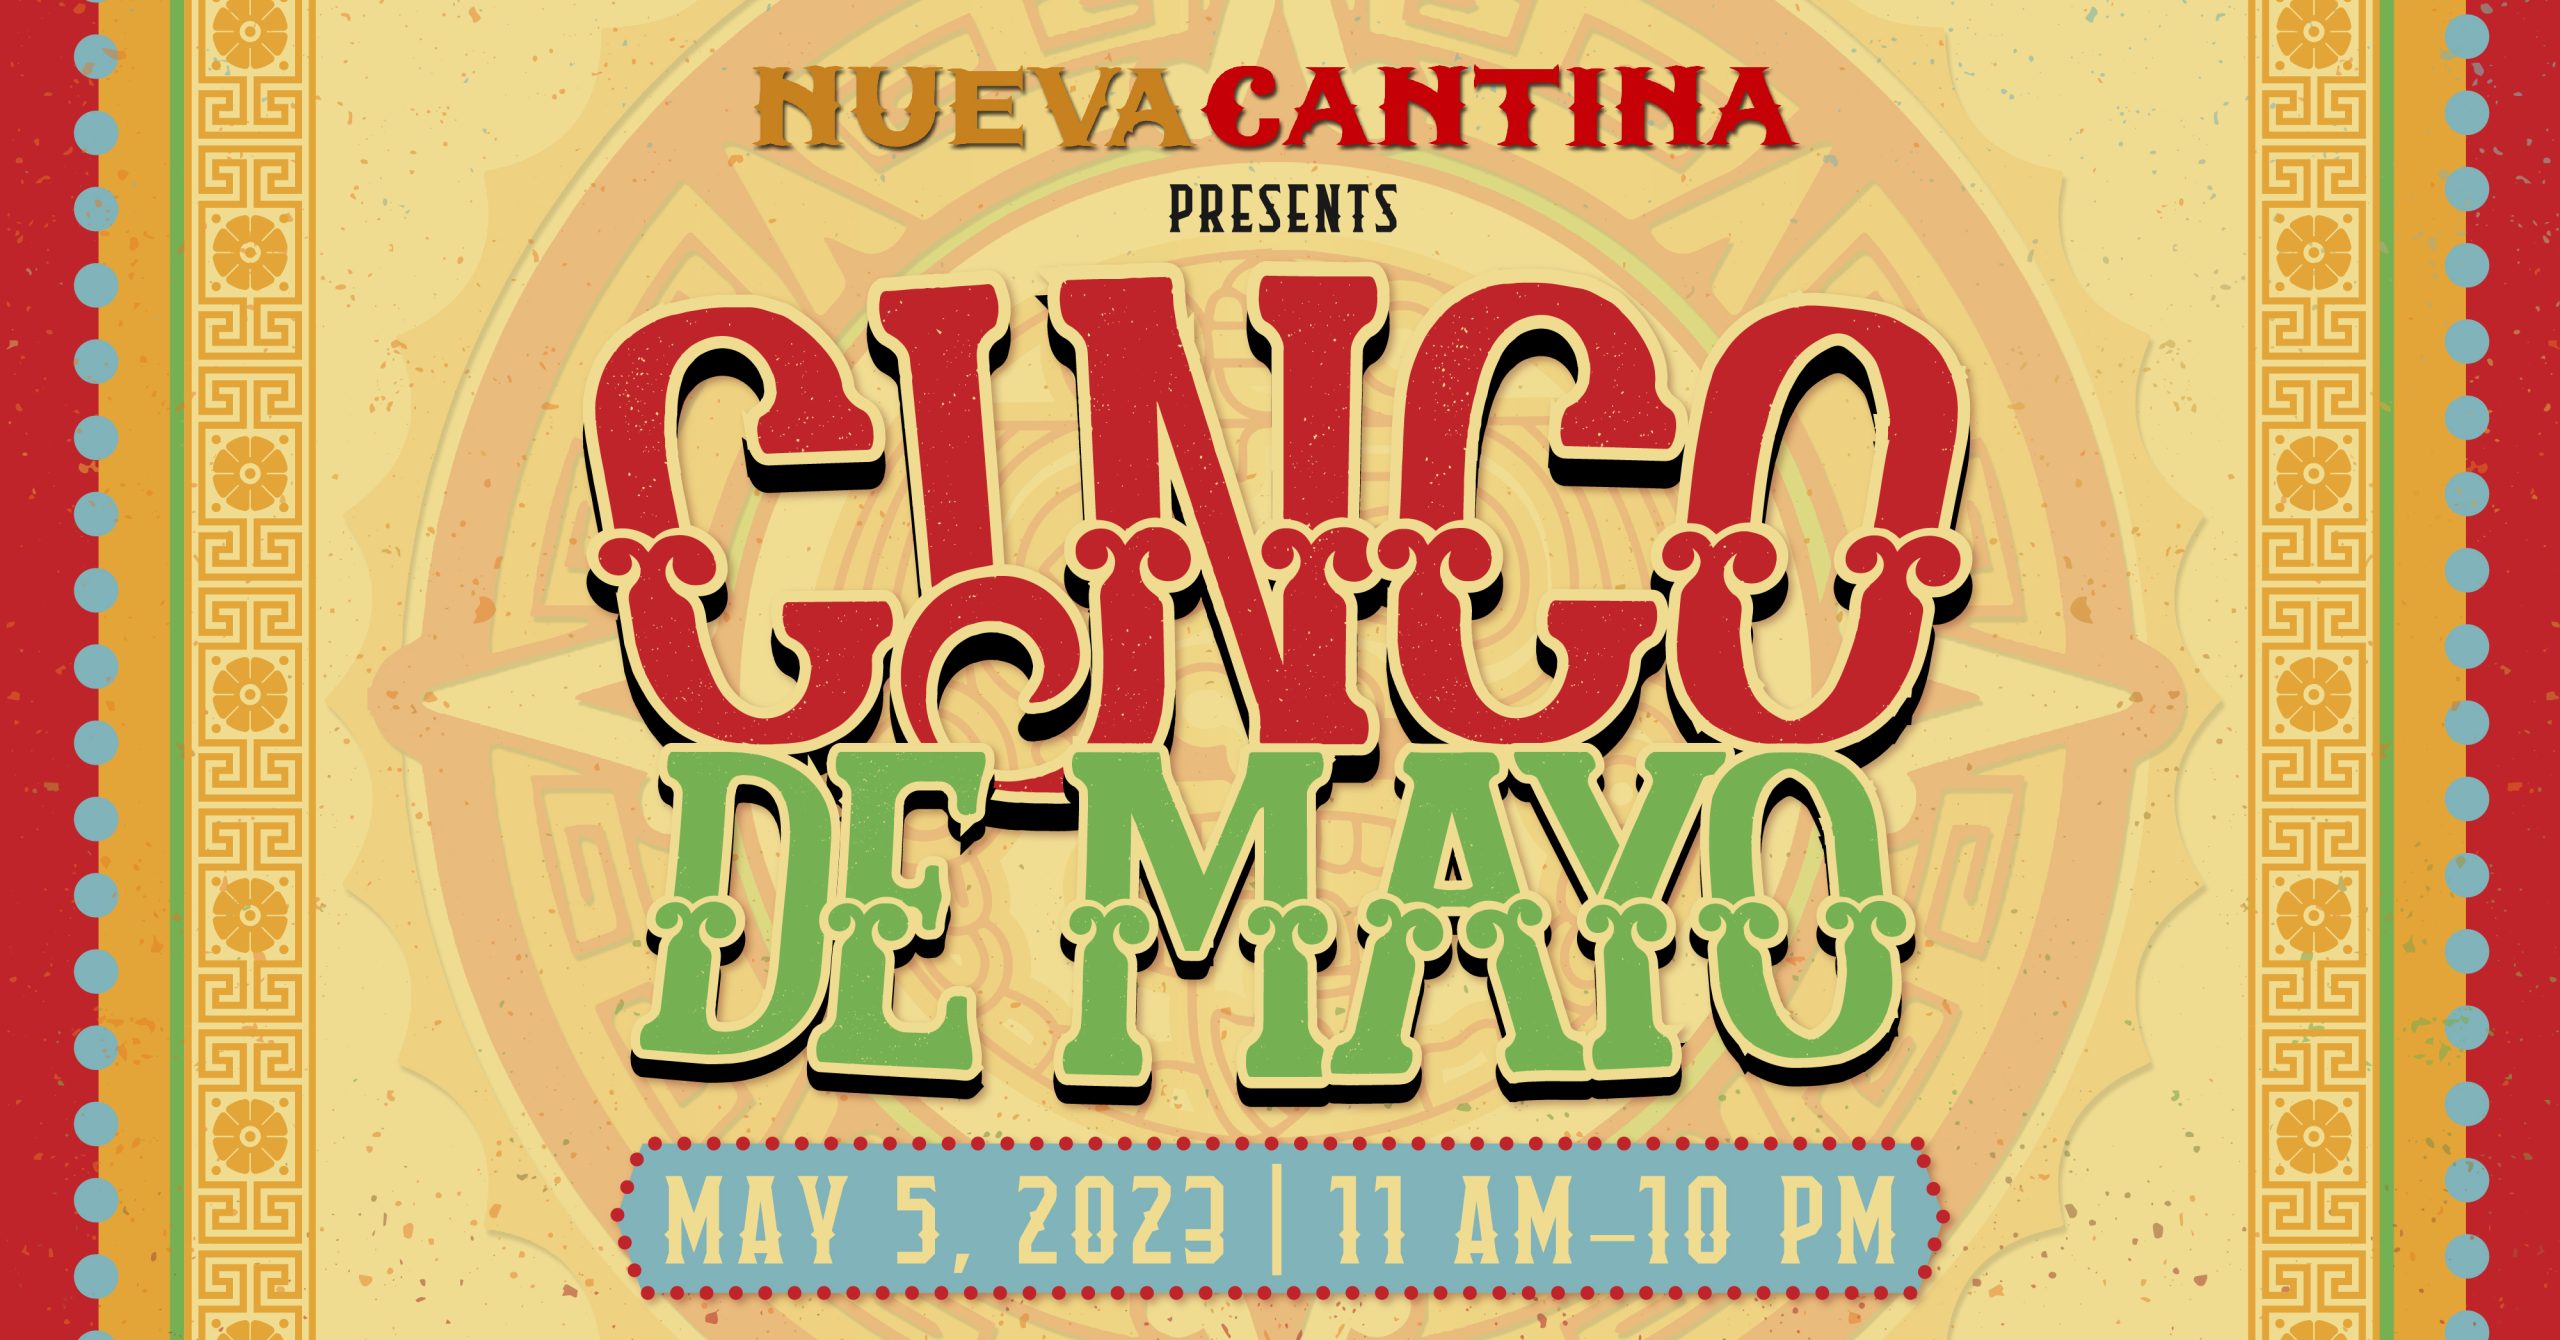 Nueva Cantina Celebrates Cinco de Mayo With Authentic Mexican Cuisine, Face Painting and Live Music